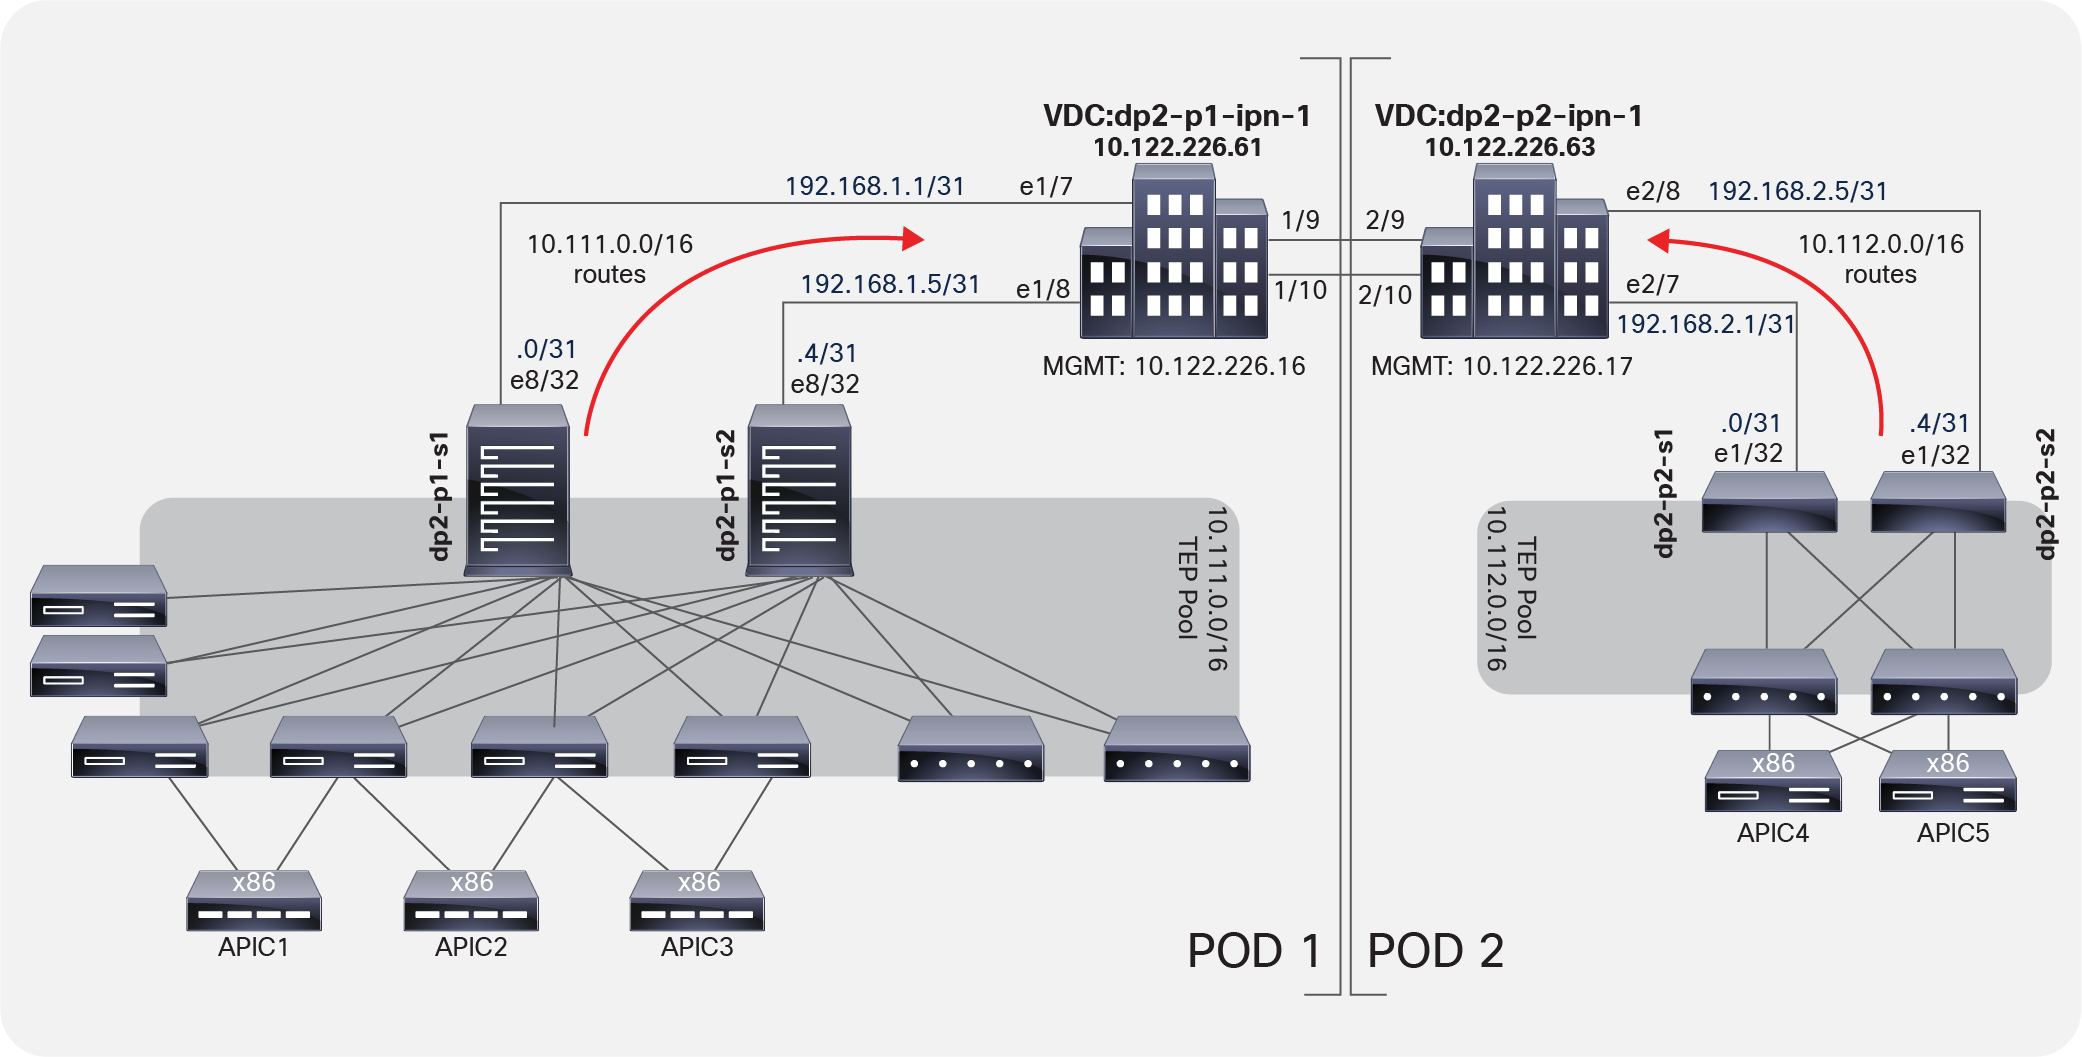 IPN routers learn routes through route redistribution